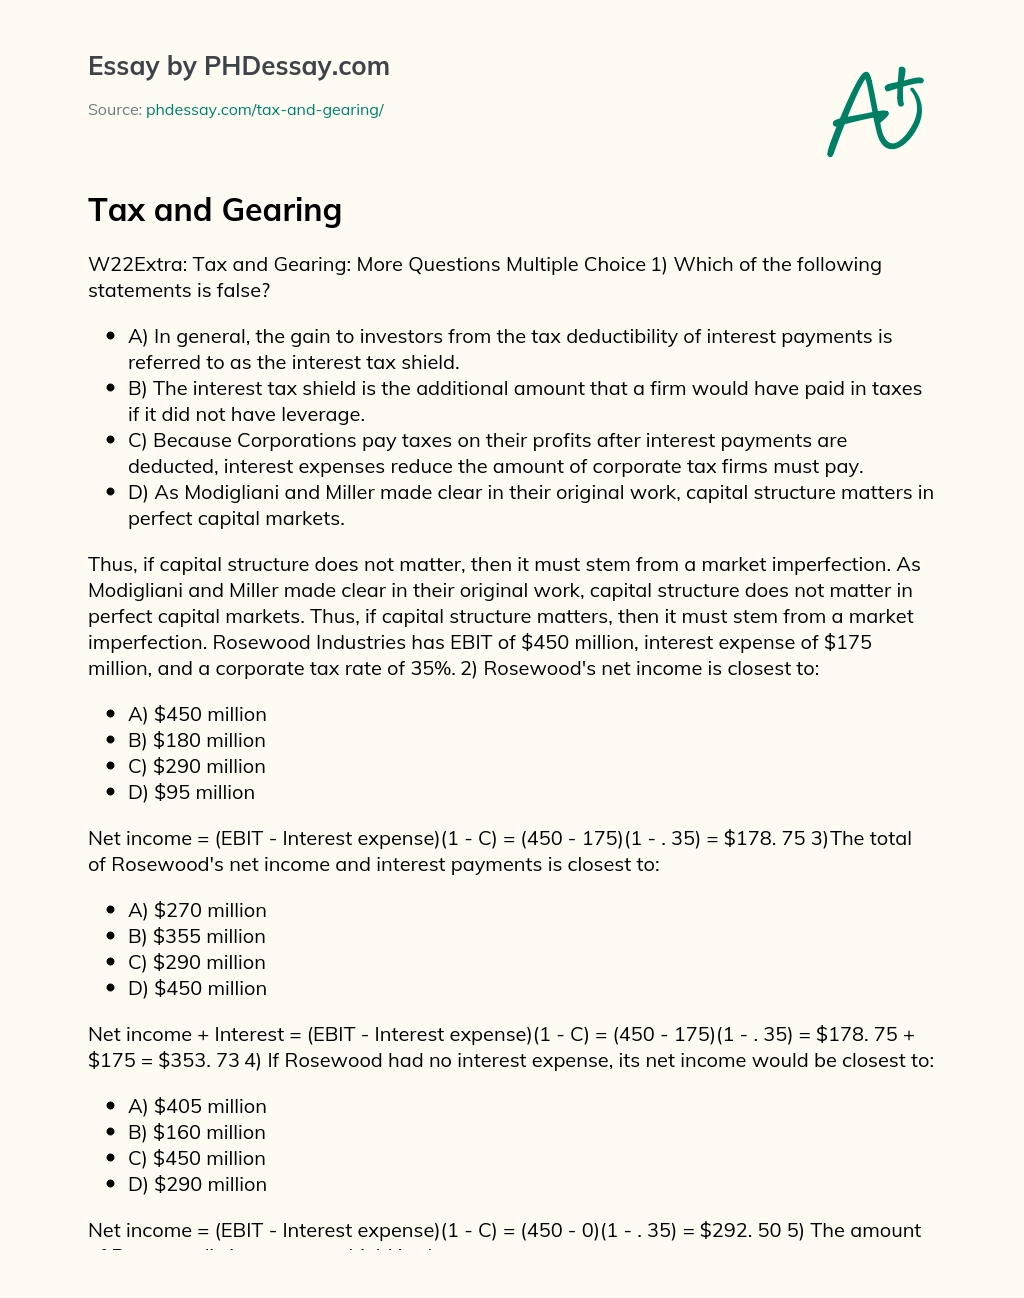 Tax and Gearing essay